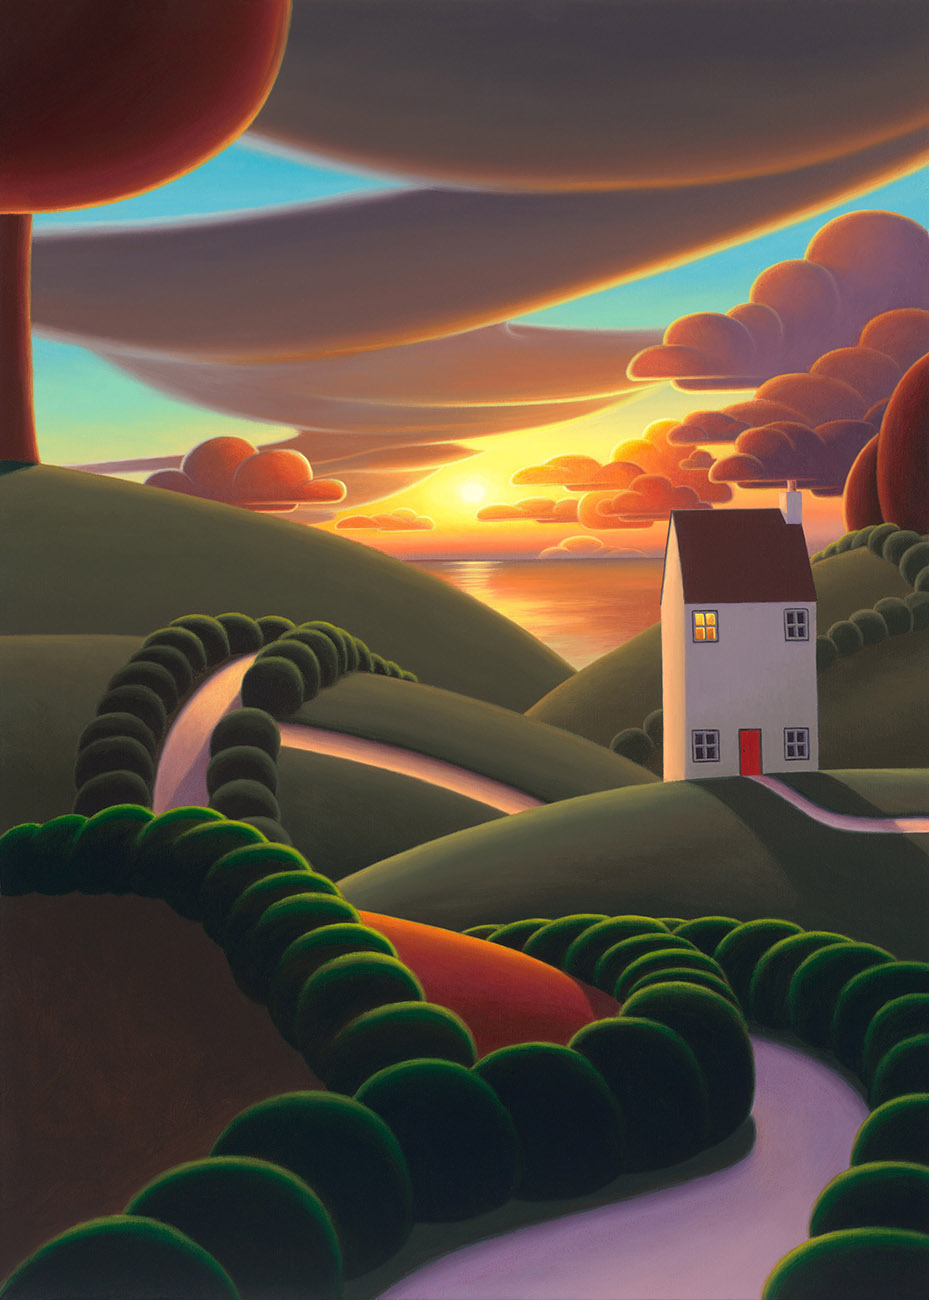 Summer Nights by Paul Corfield, Landscape | Rare